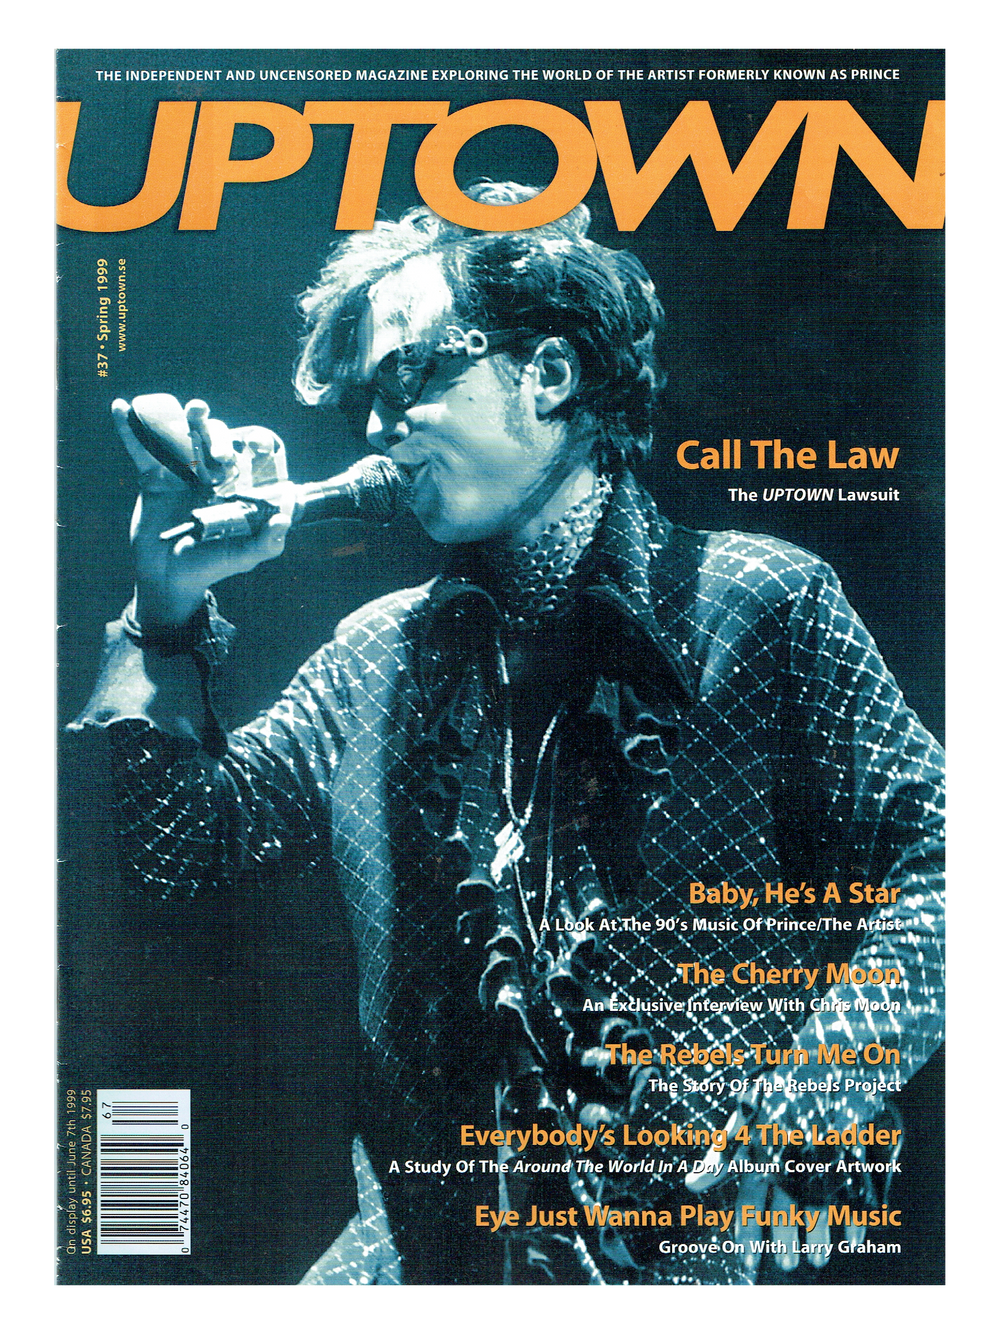 Uptown The Magazine For Prince Fans & Collectors Issue Number 37